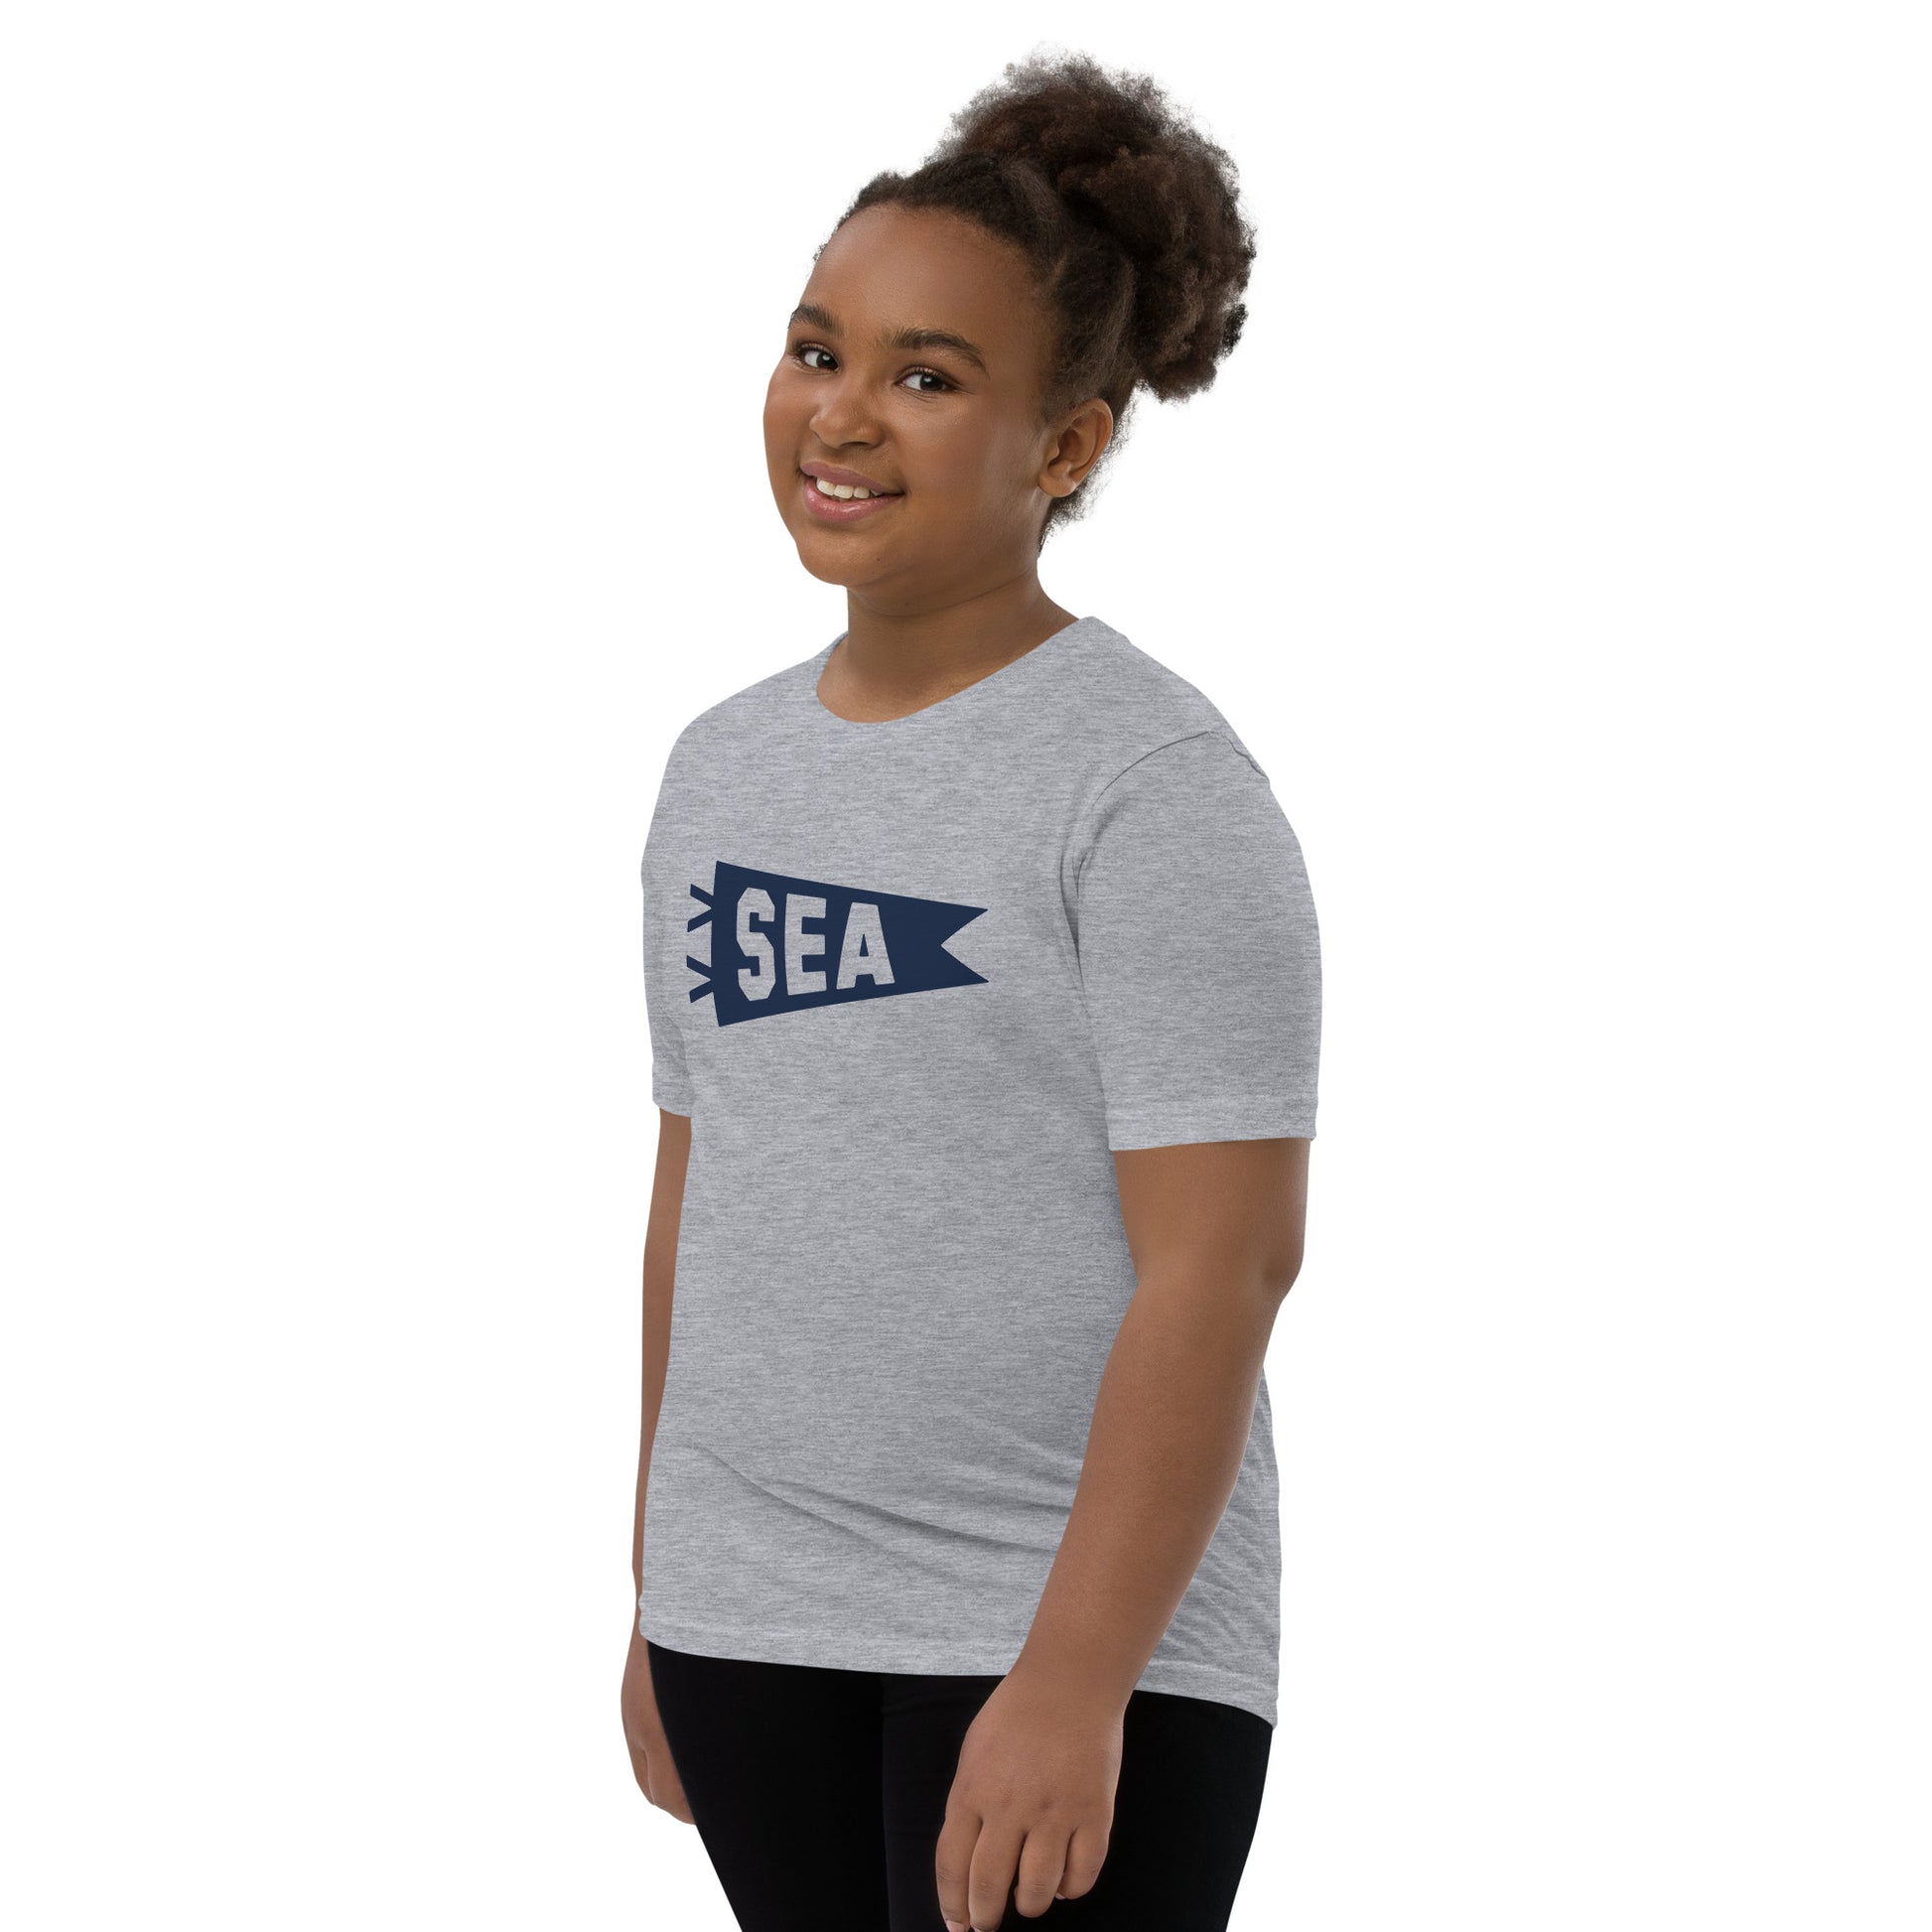 Kid's Airport Code Tee - Navy Blue Graphic • SEA Seattle • YHM Designs - Image 04